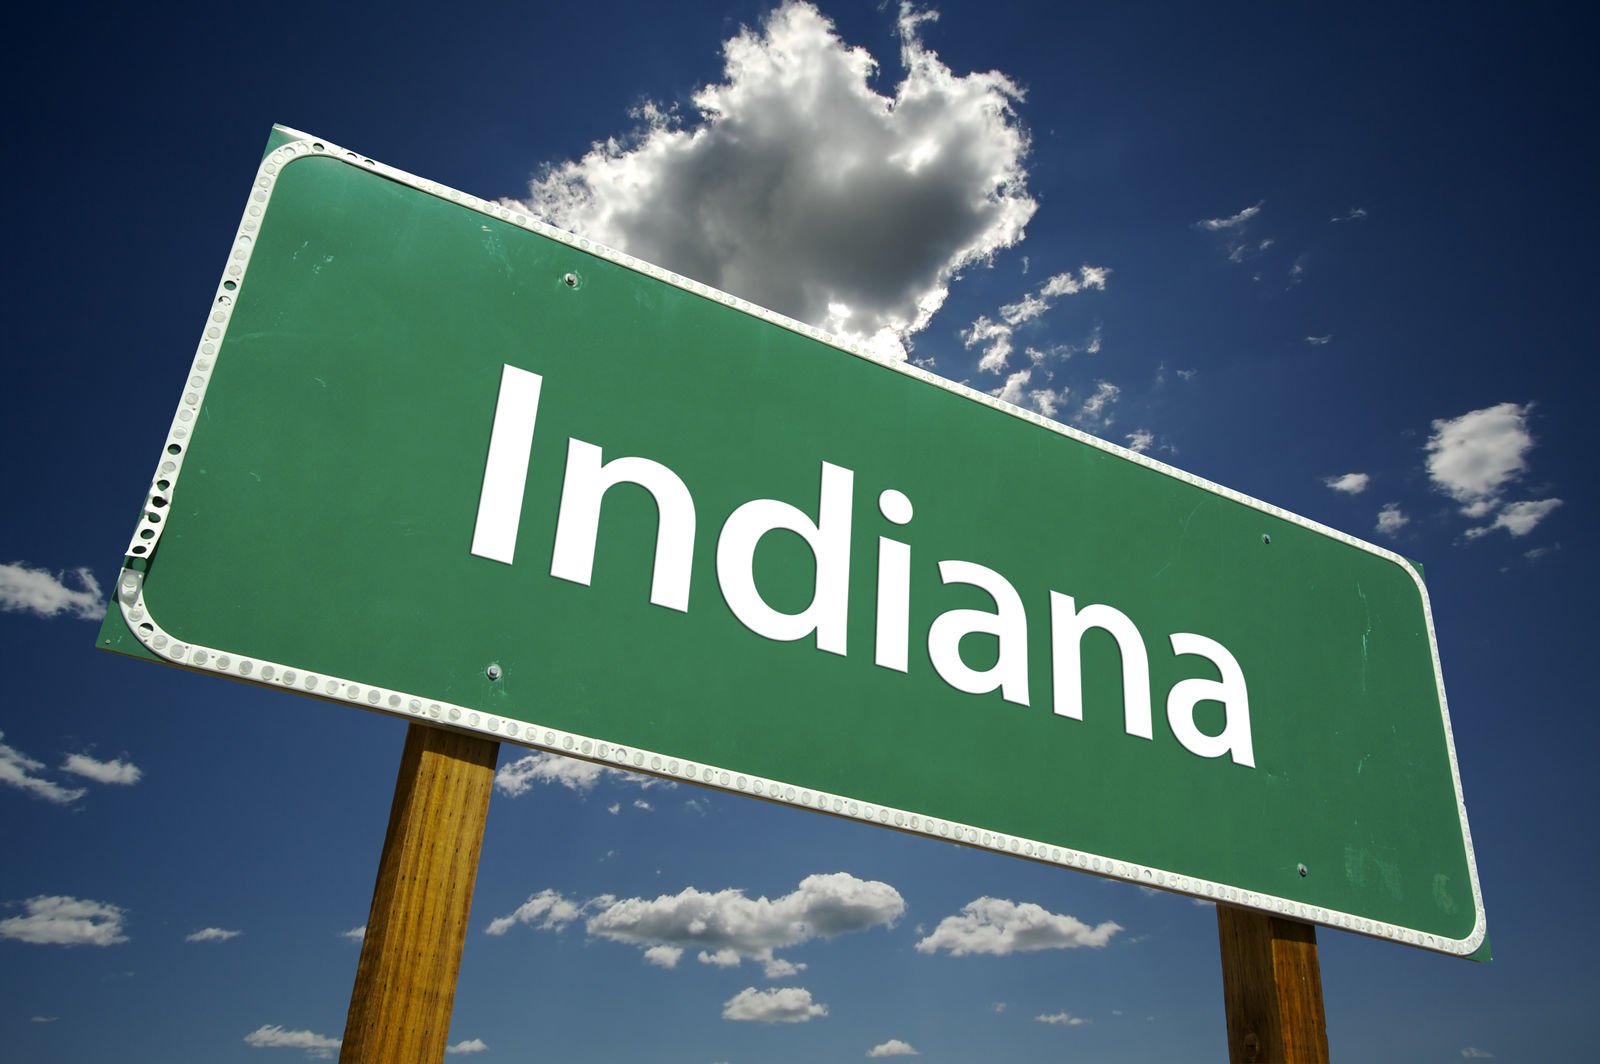 Indiana Windshield Replacement Insurance: What are the full glass coverage laws in Indiana?